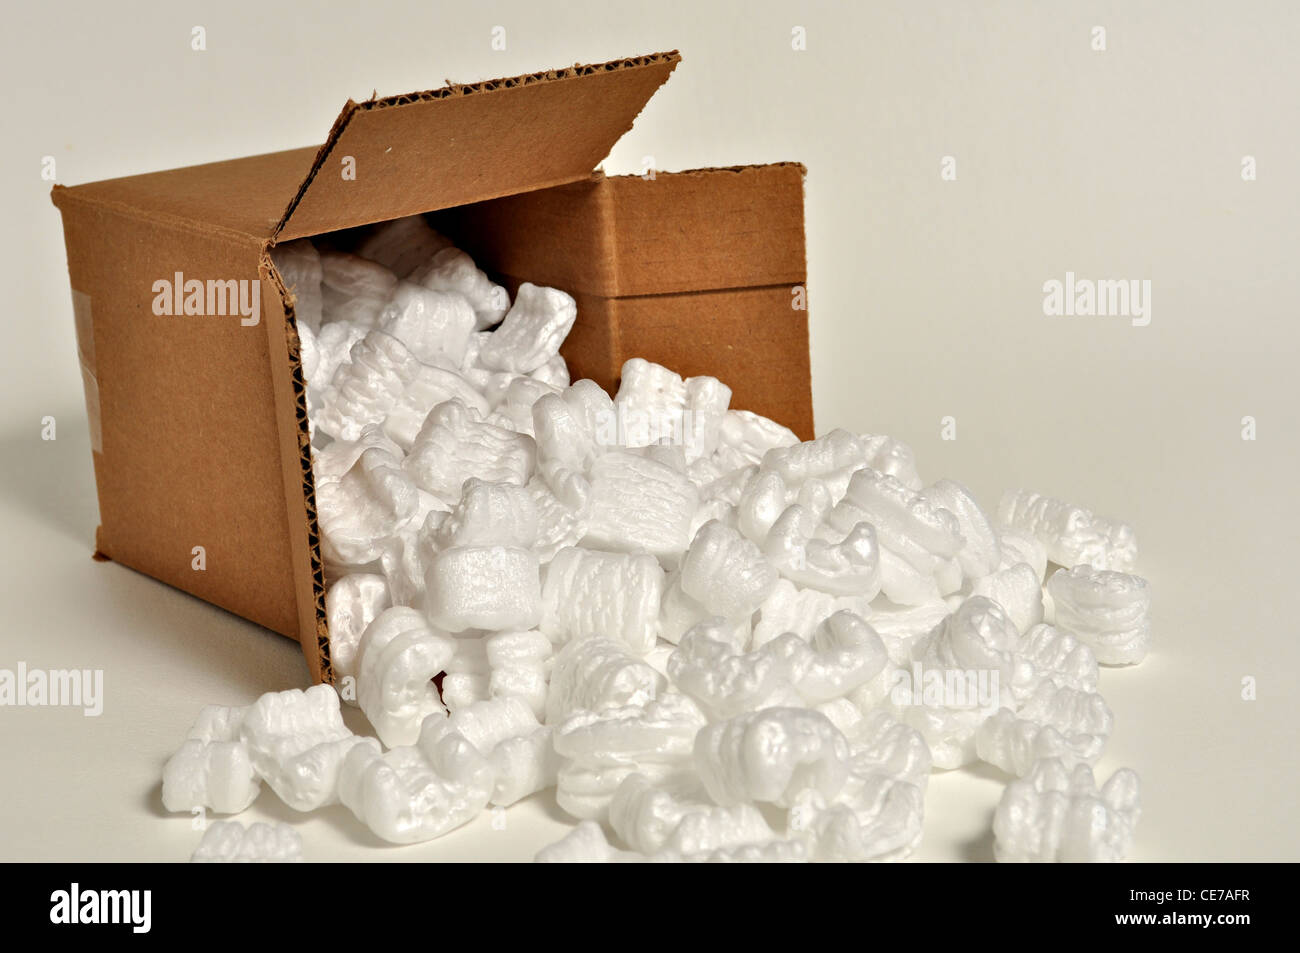 A cardboard box is laying on its side with shipping peanuts spilling out. Stock Photo